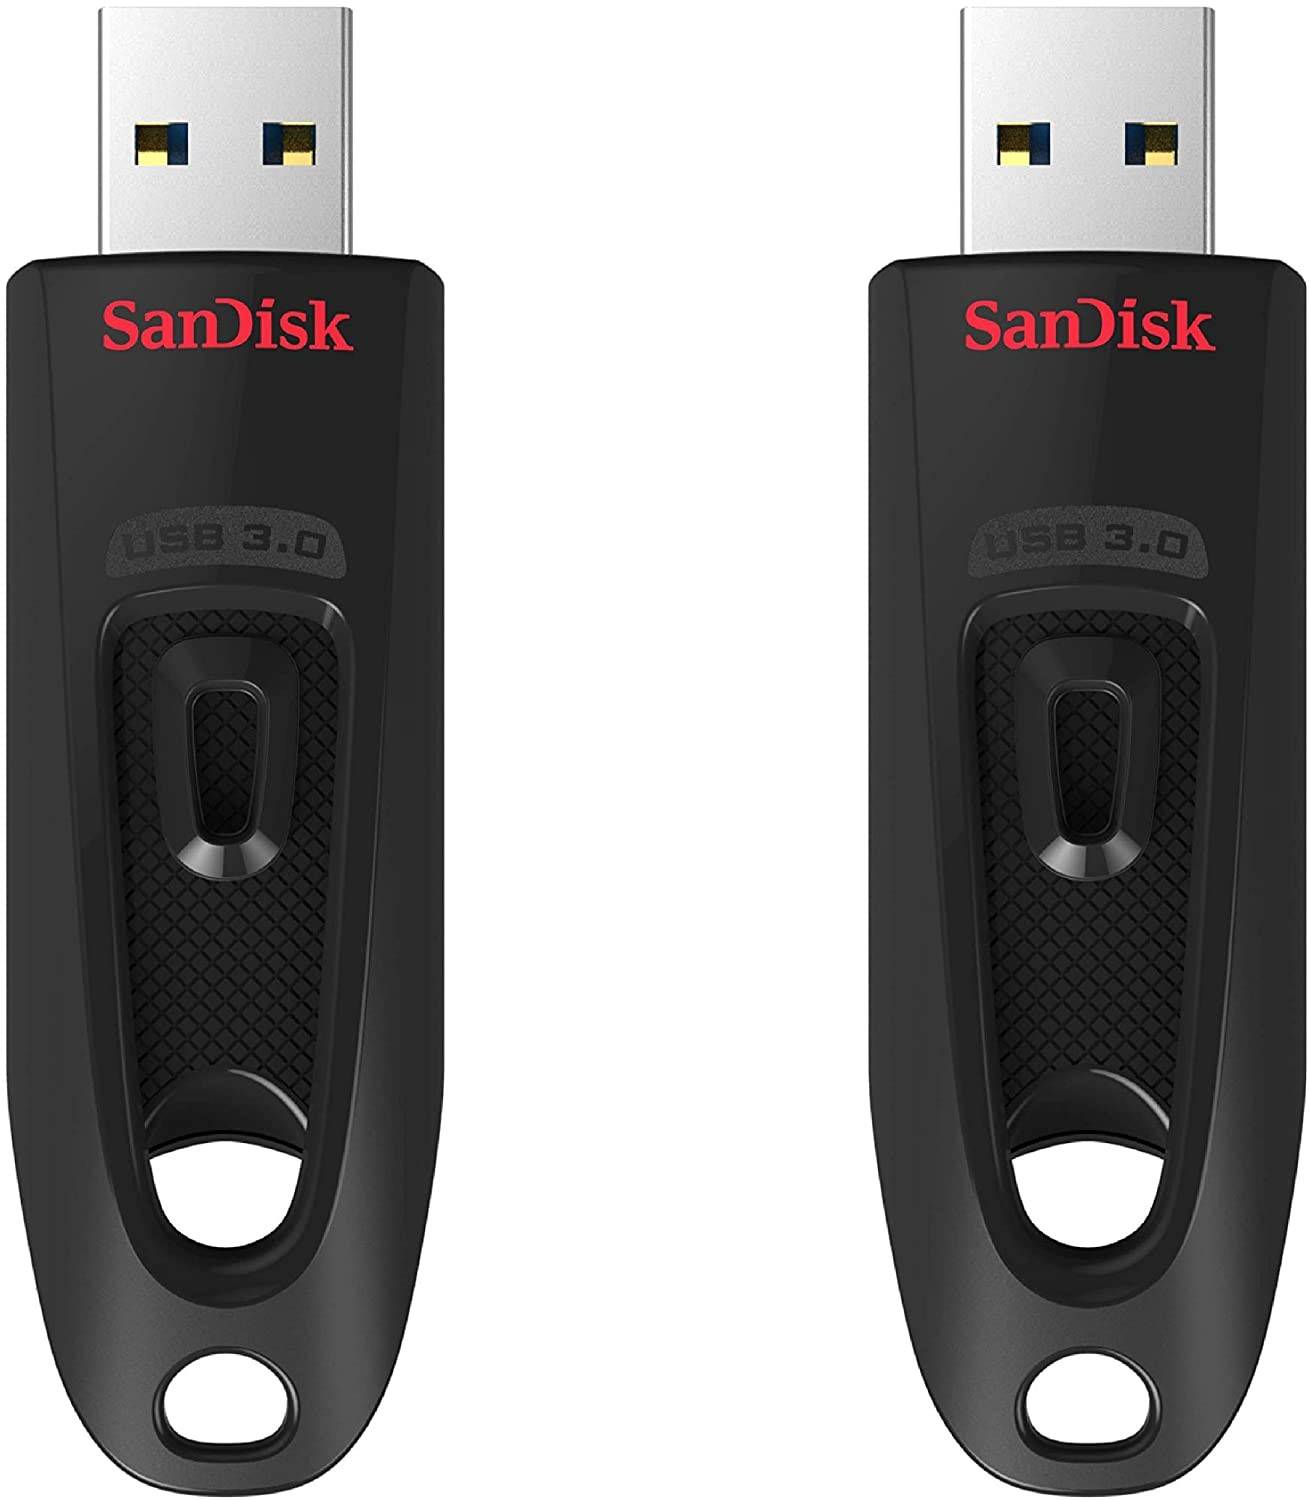 Sandisk 32GB and 64GB flash drives